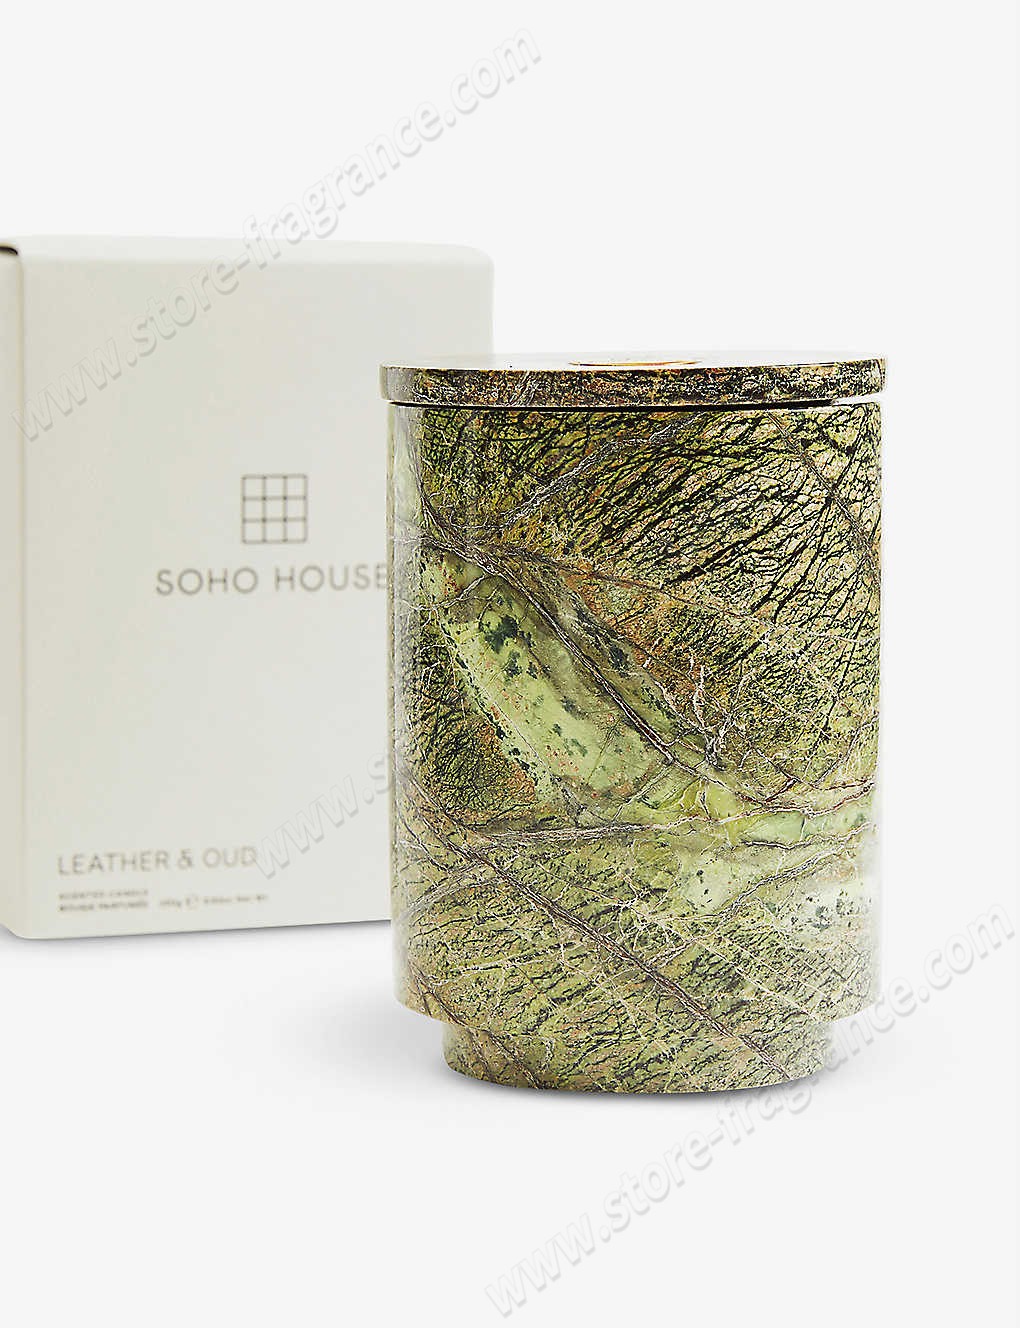 SOHO HOME/Verona leather and oud scented marble candle 250g ✿ Discount Store - SOHO HOME/Verona leather and oud scented marble candle 250g ✿ Discount Store